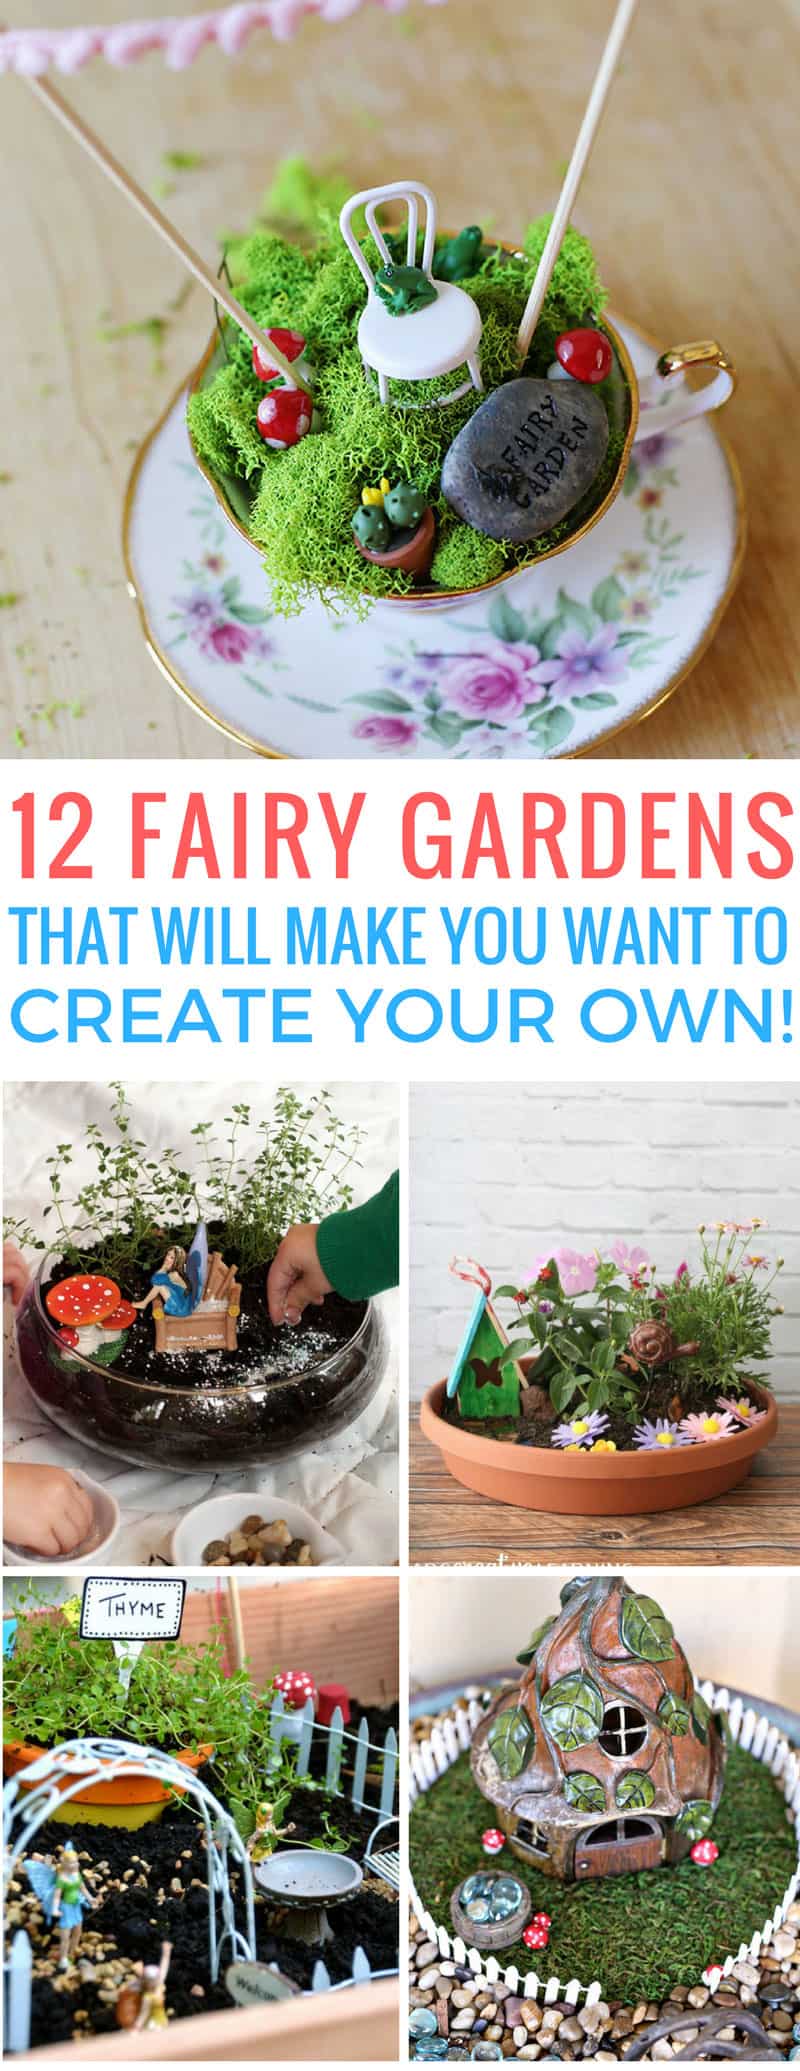 Totally inspired by these wonderful fairy gardens we're going to make one! Thanks for sharing!